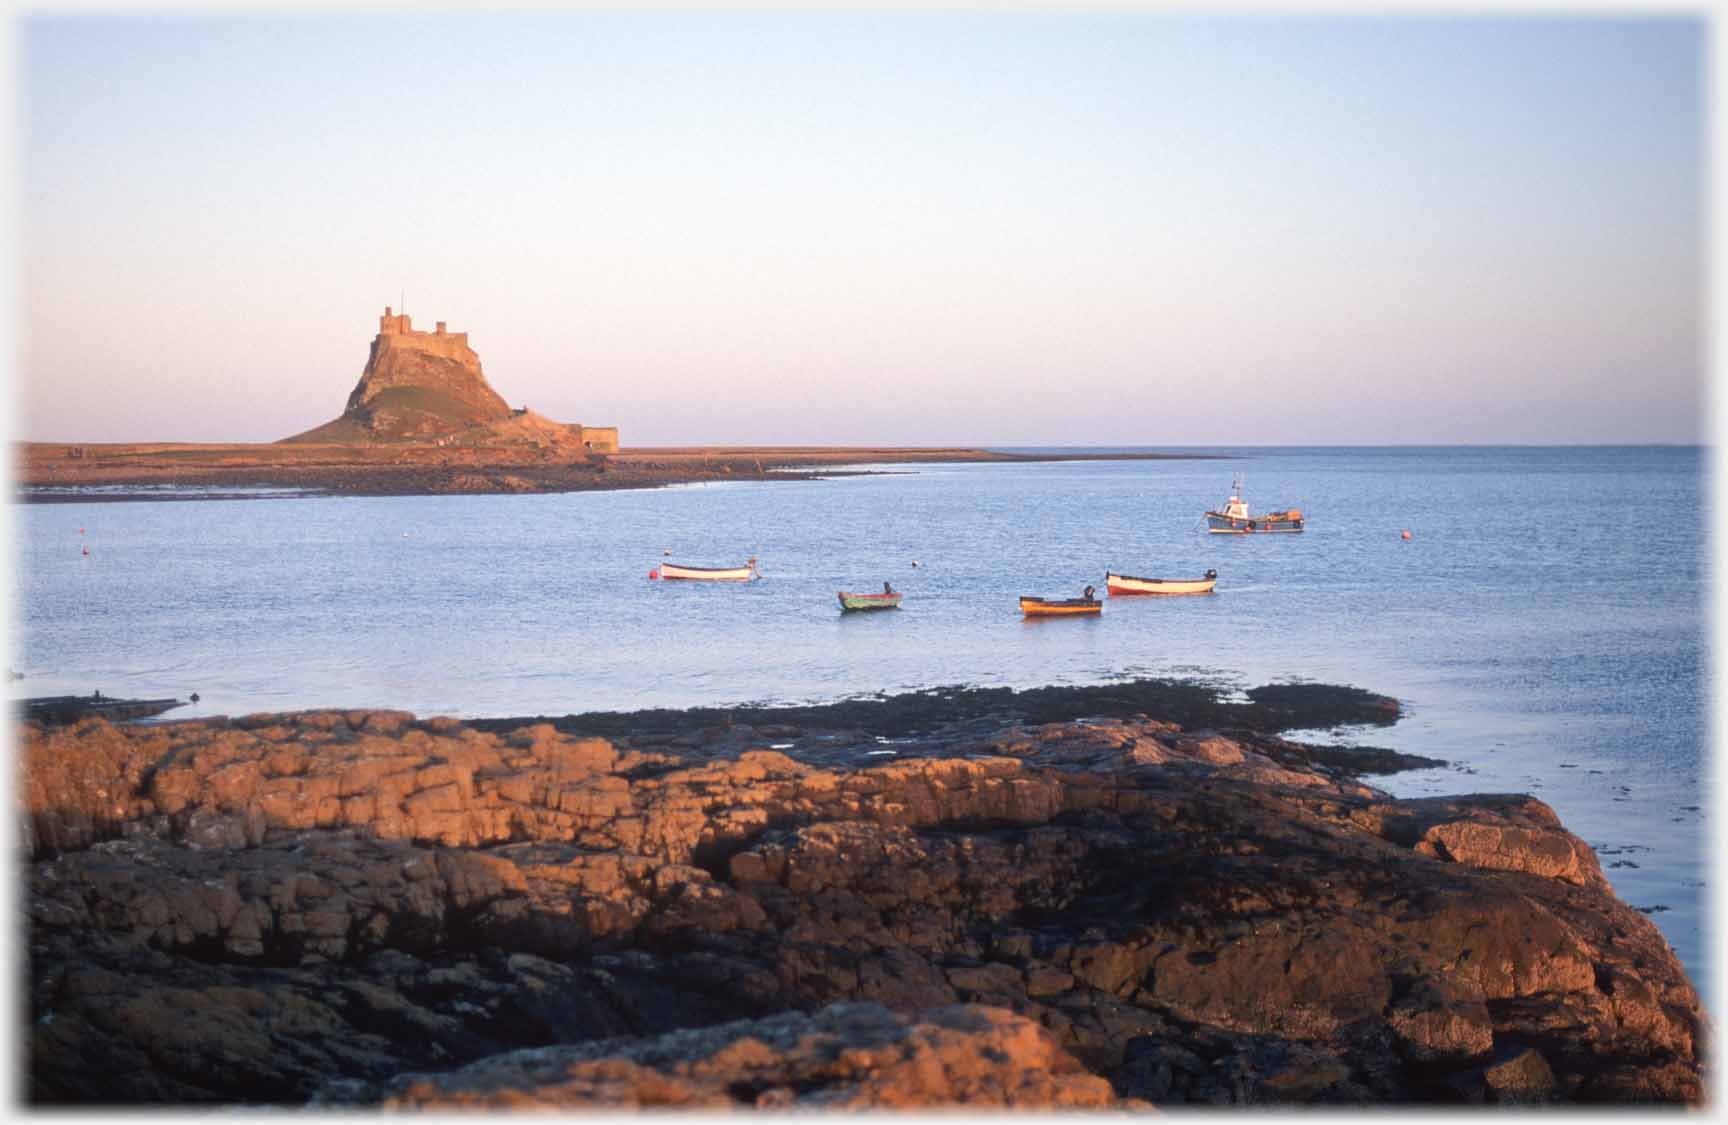 Castle on hillock, sea in foreground with five boats anchored, shore rocks.